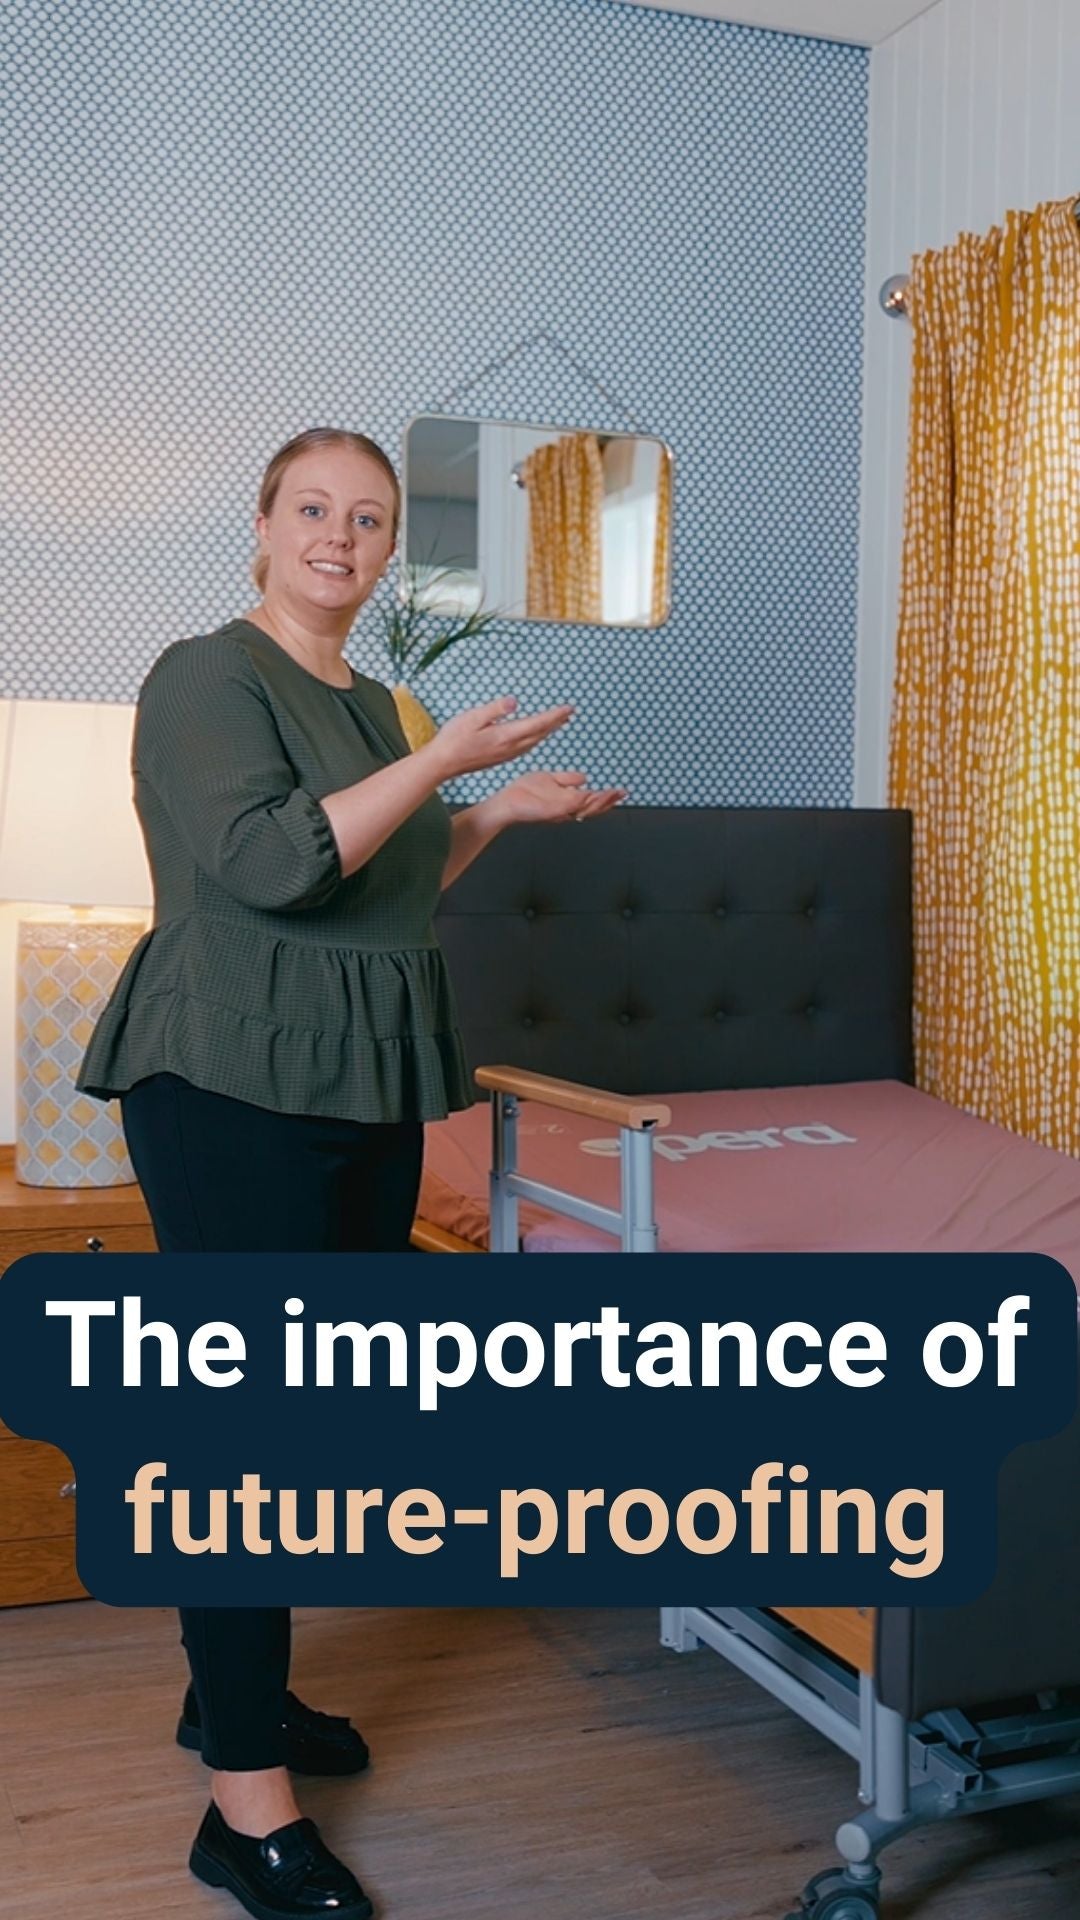 A lady stood next to a profiling bed with the caption 'The importance of future-proofing'